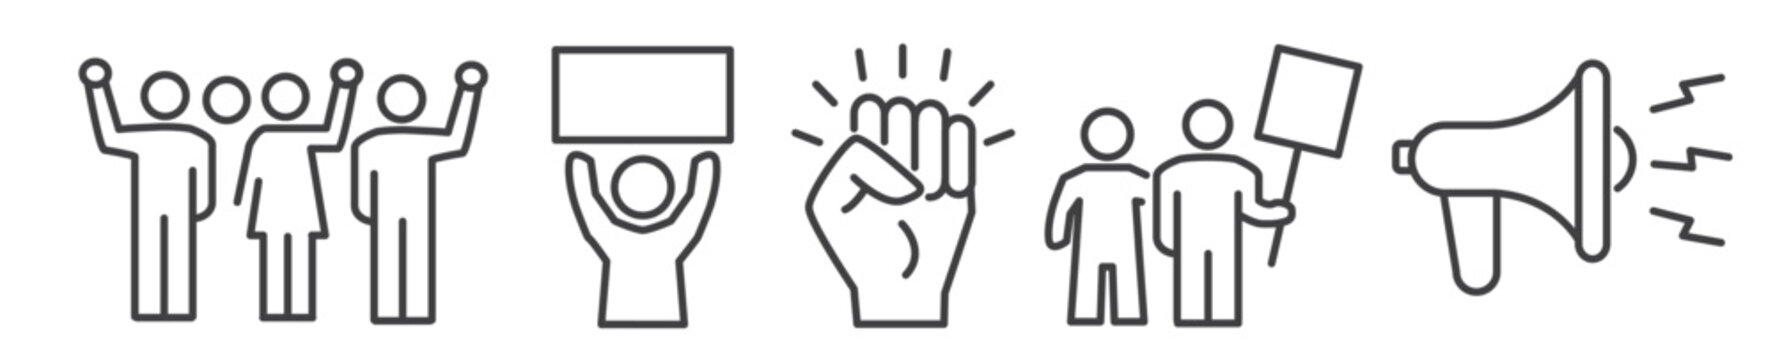 people with placards and raised up fists - set of protest icons